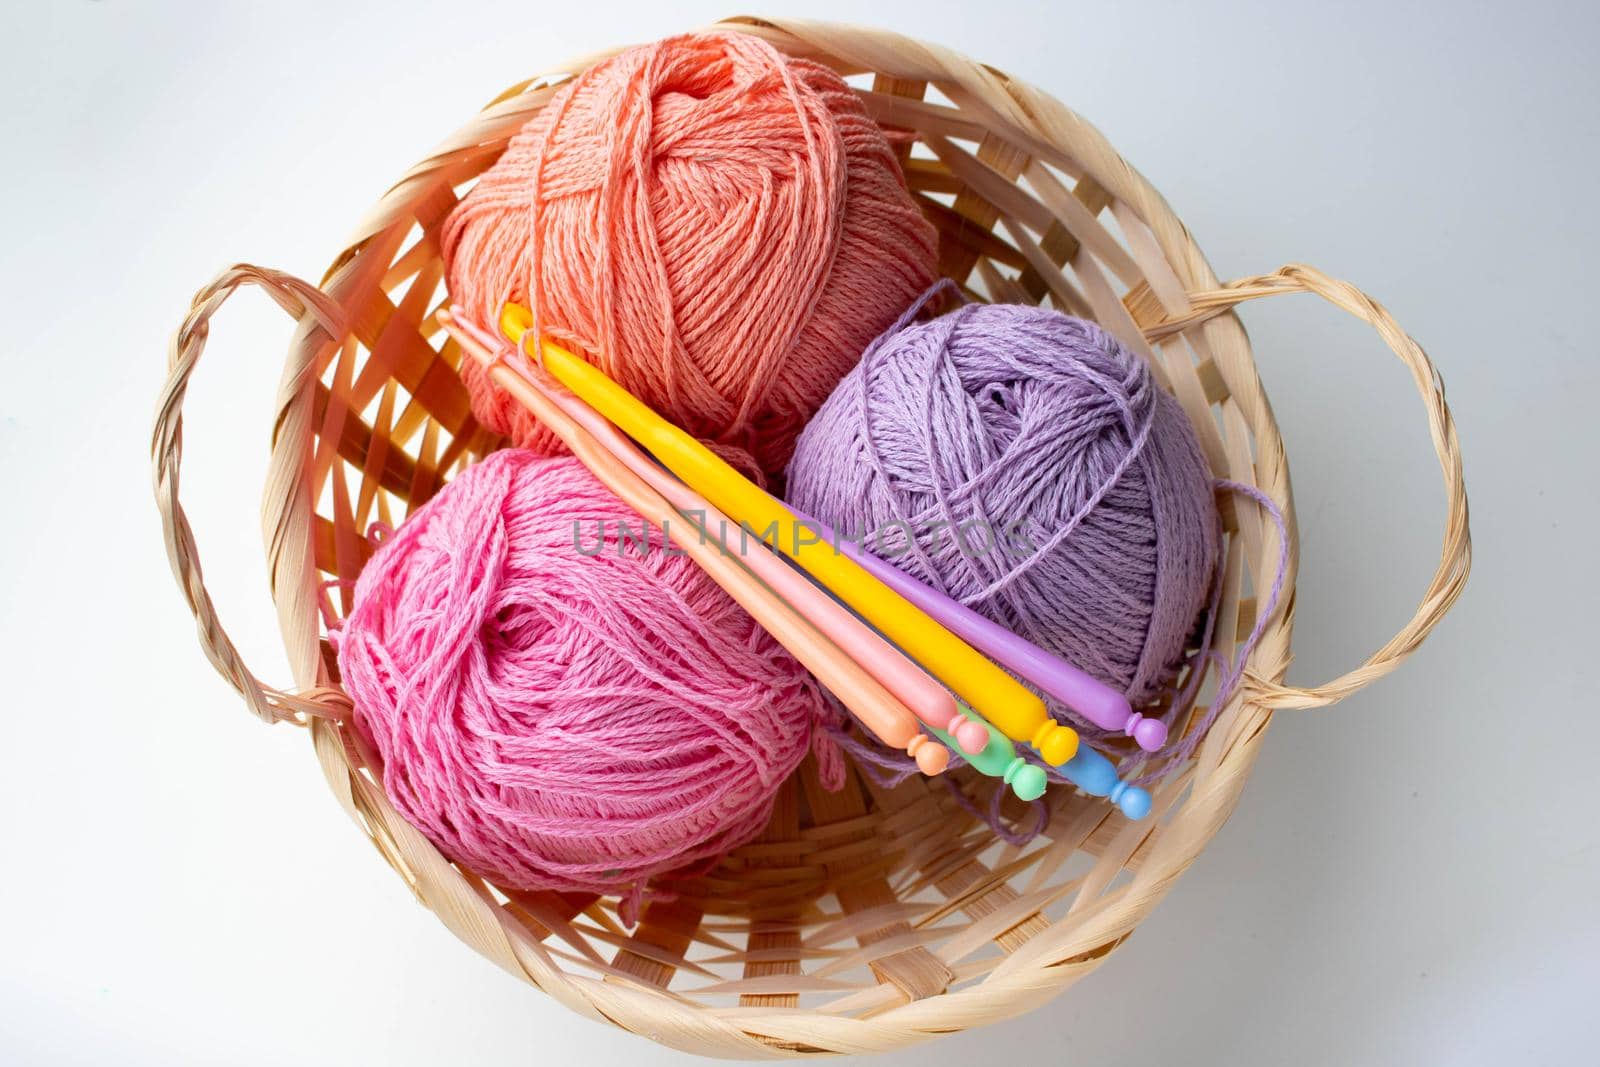 Balls of colored yarn in a basket on white background by lapushka62